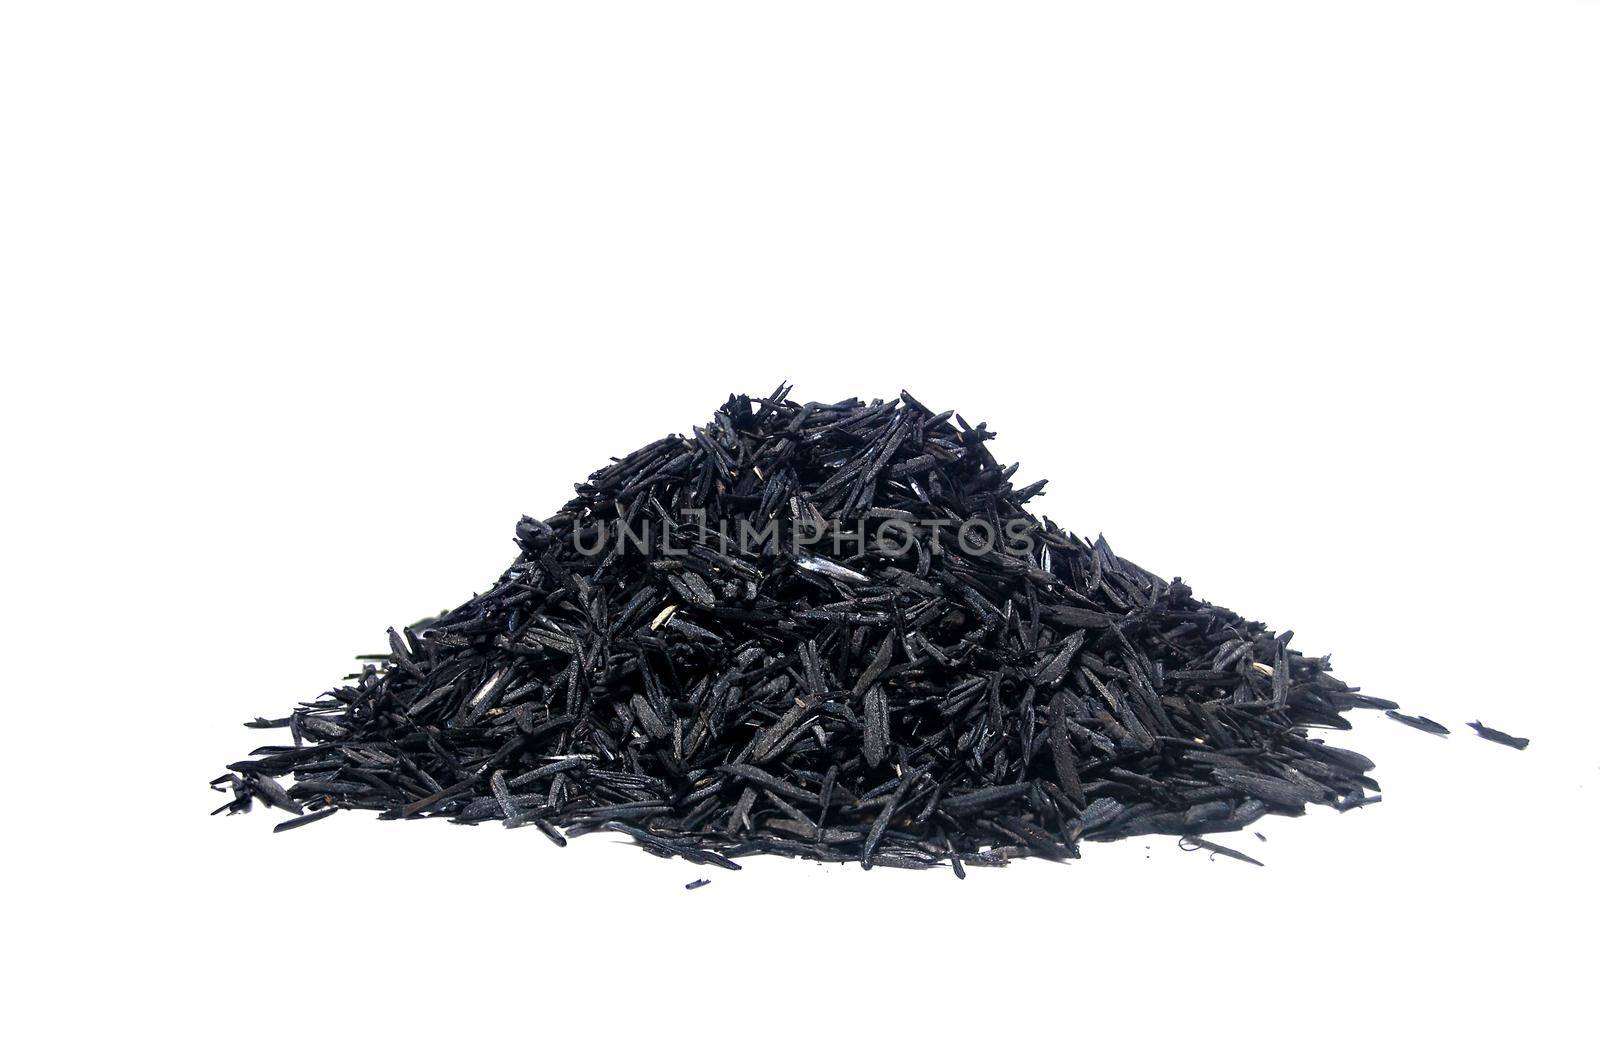 Black chaff on white background with clipping path